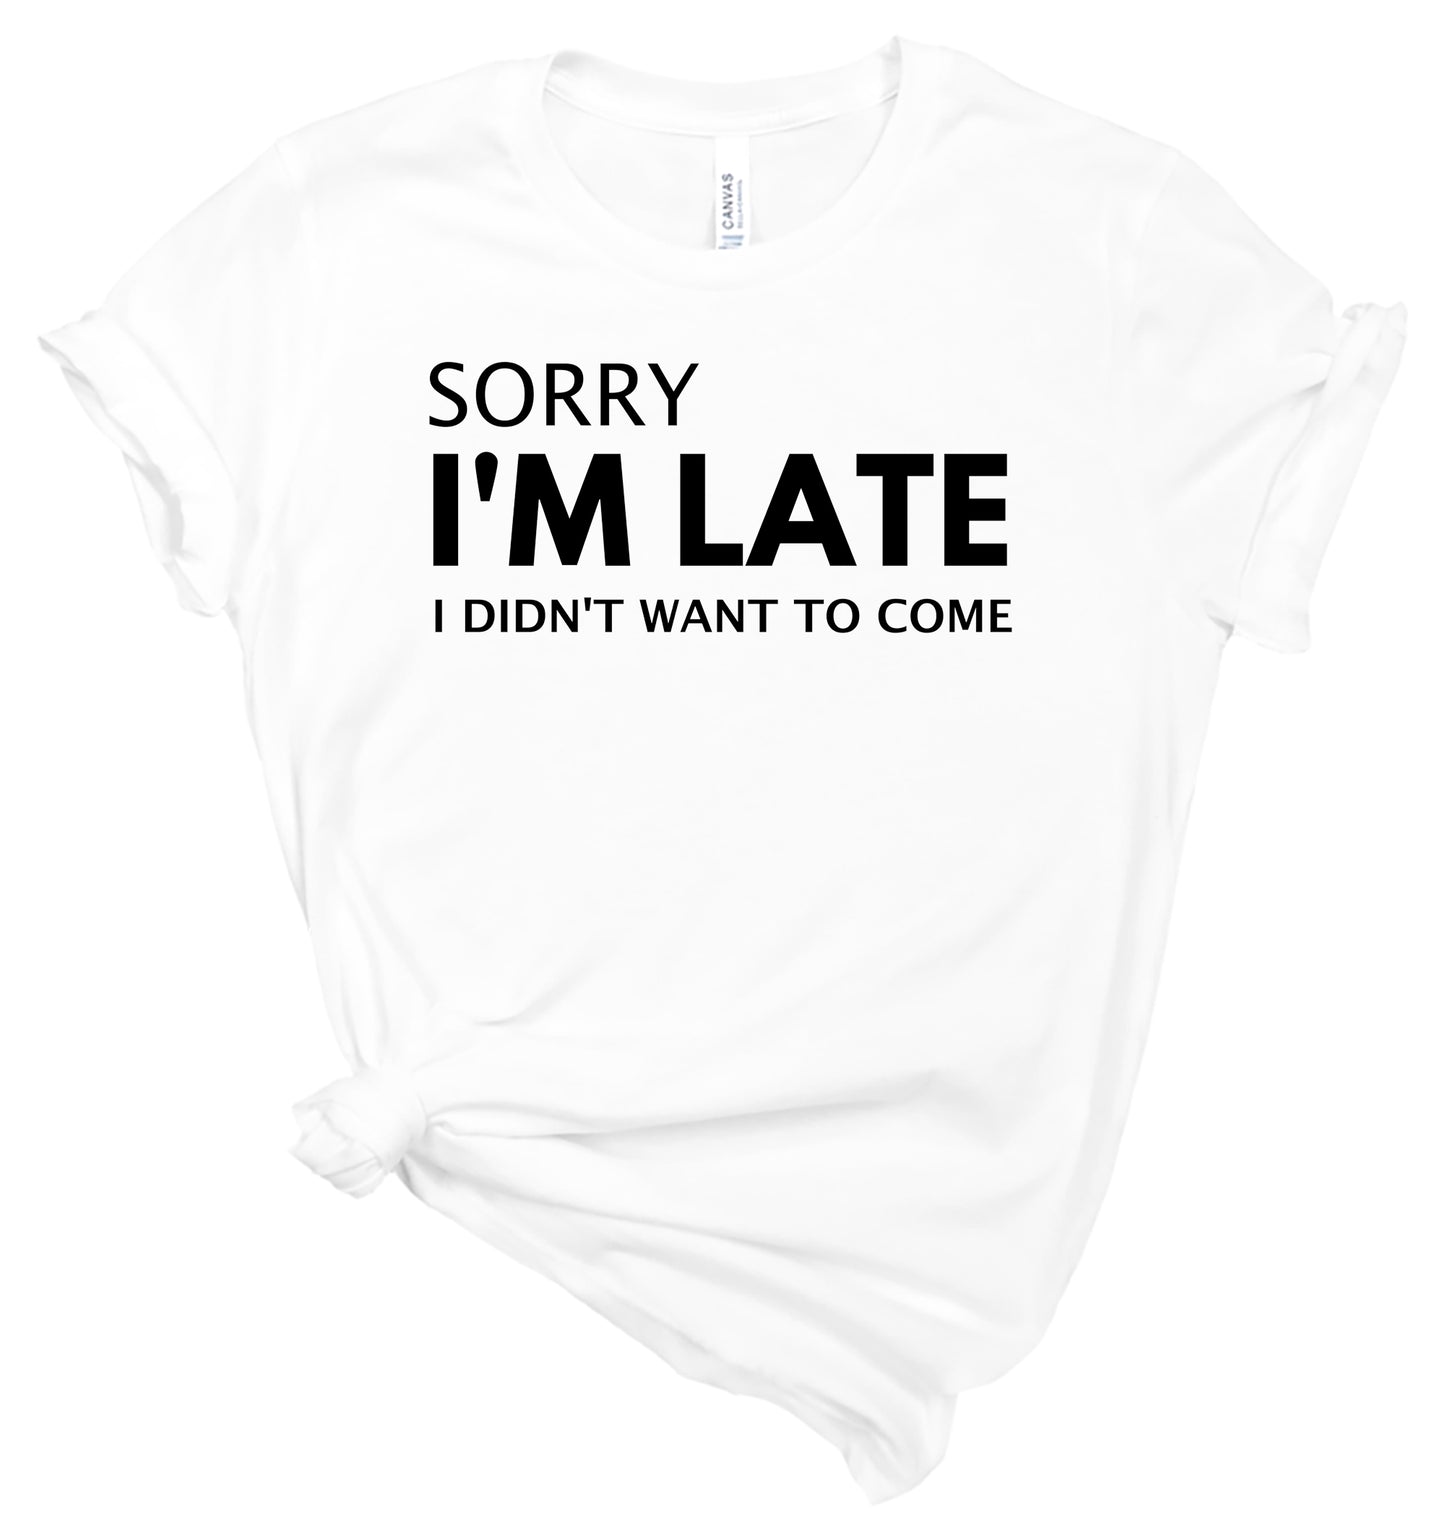 Sorry I'm Late I Didn't Want to Come - T-Shirt